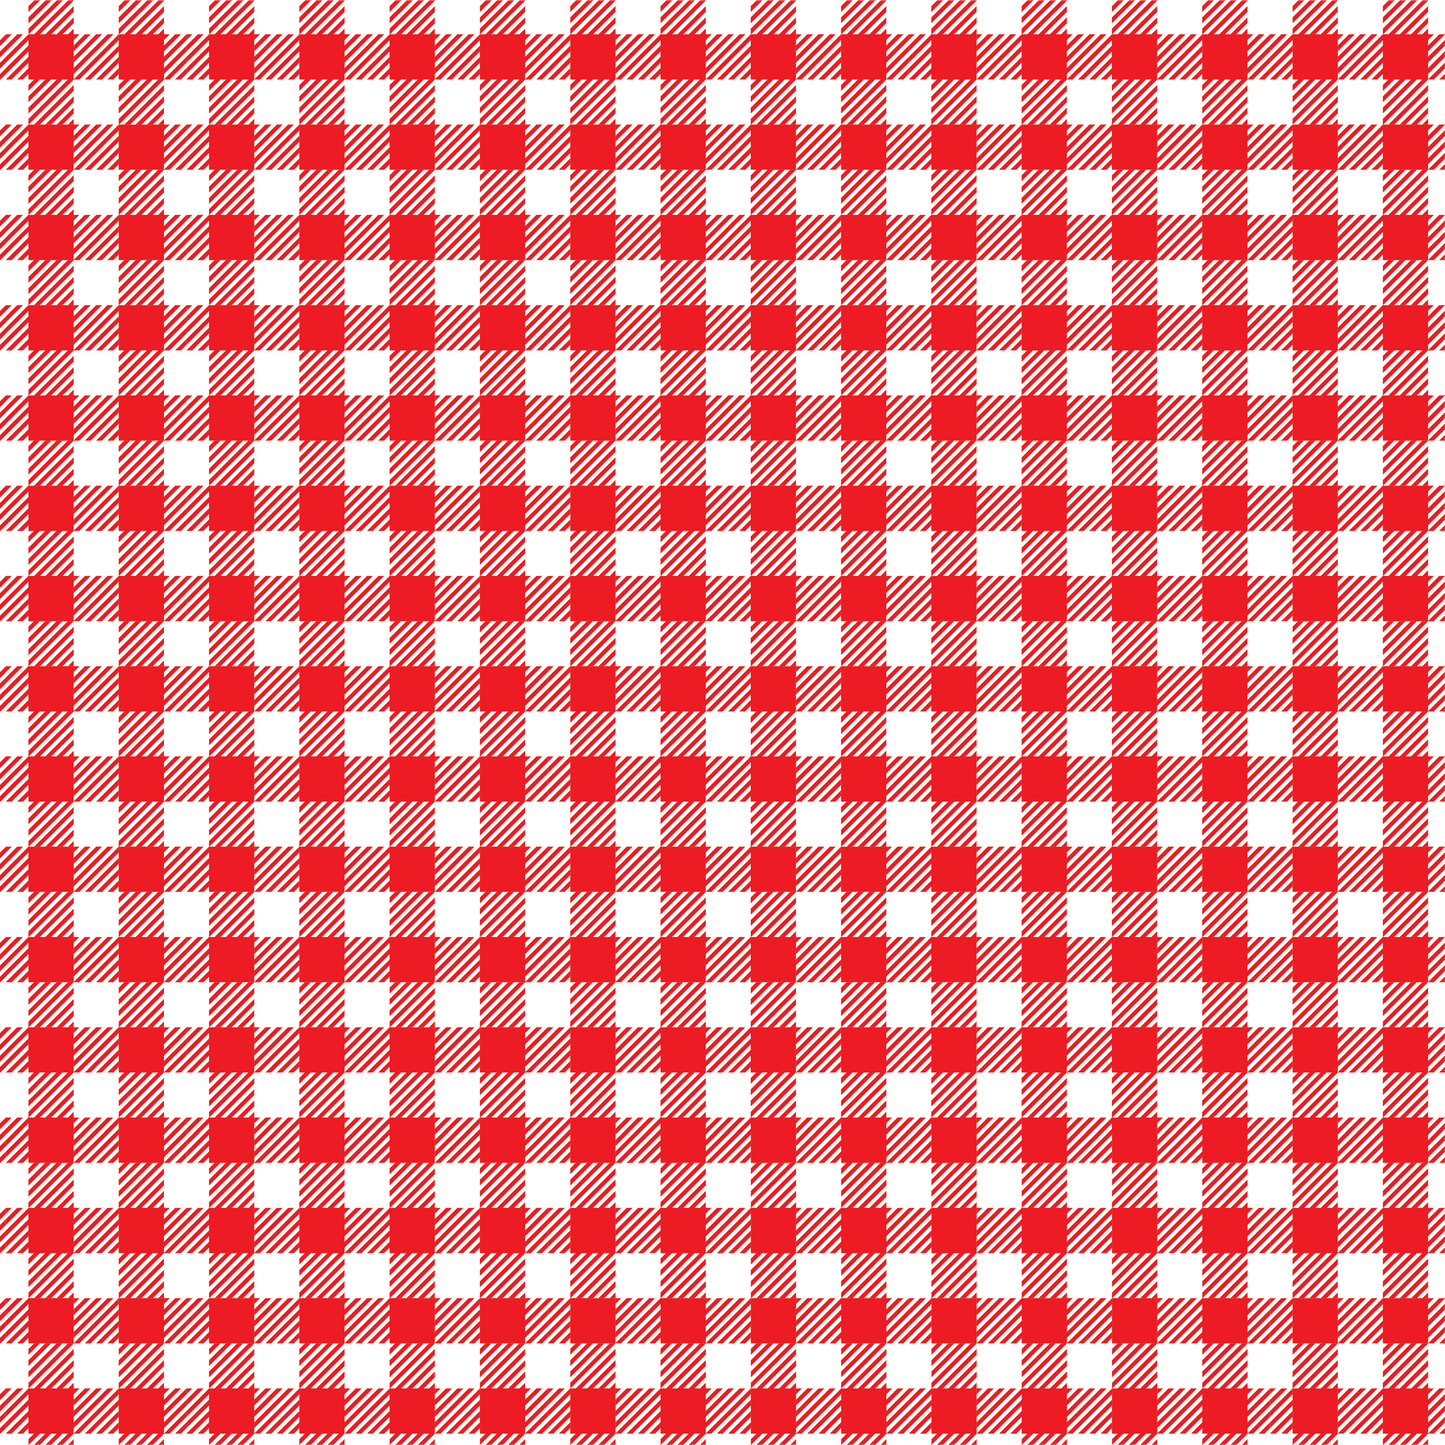 Canada Day - Red and White Plaid 008